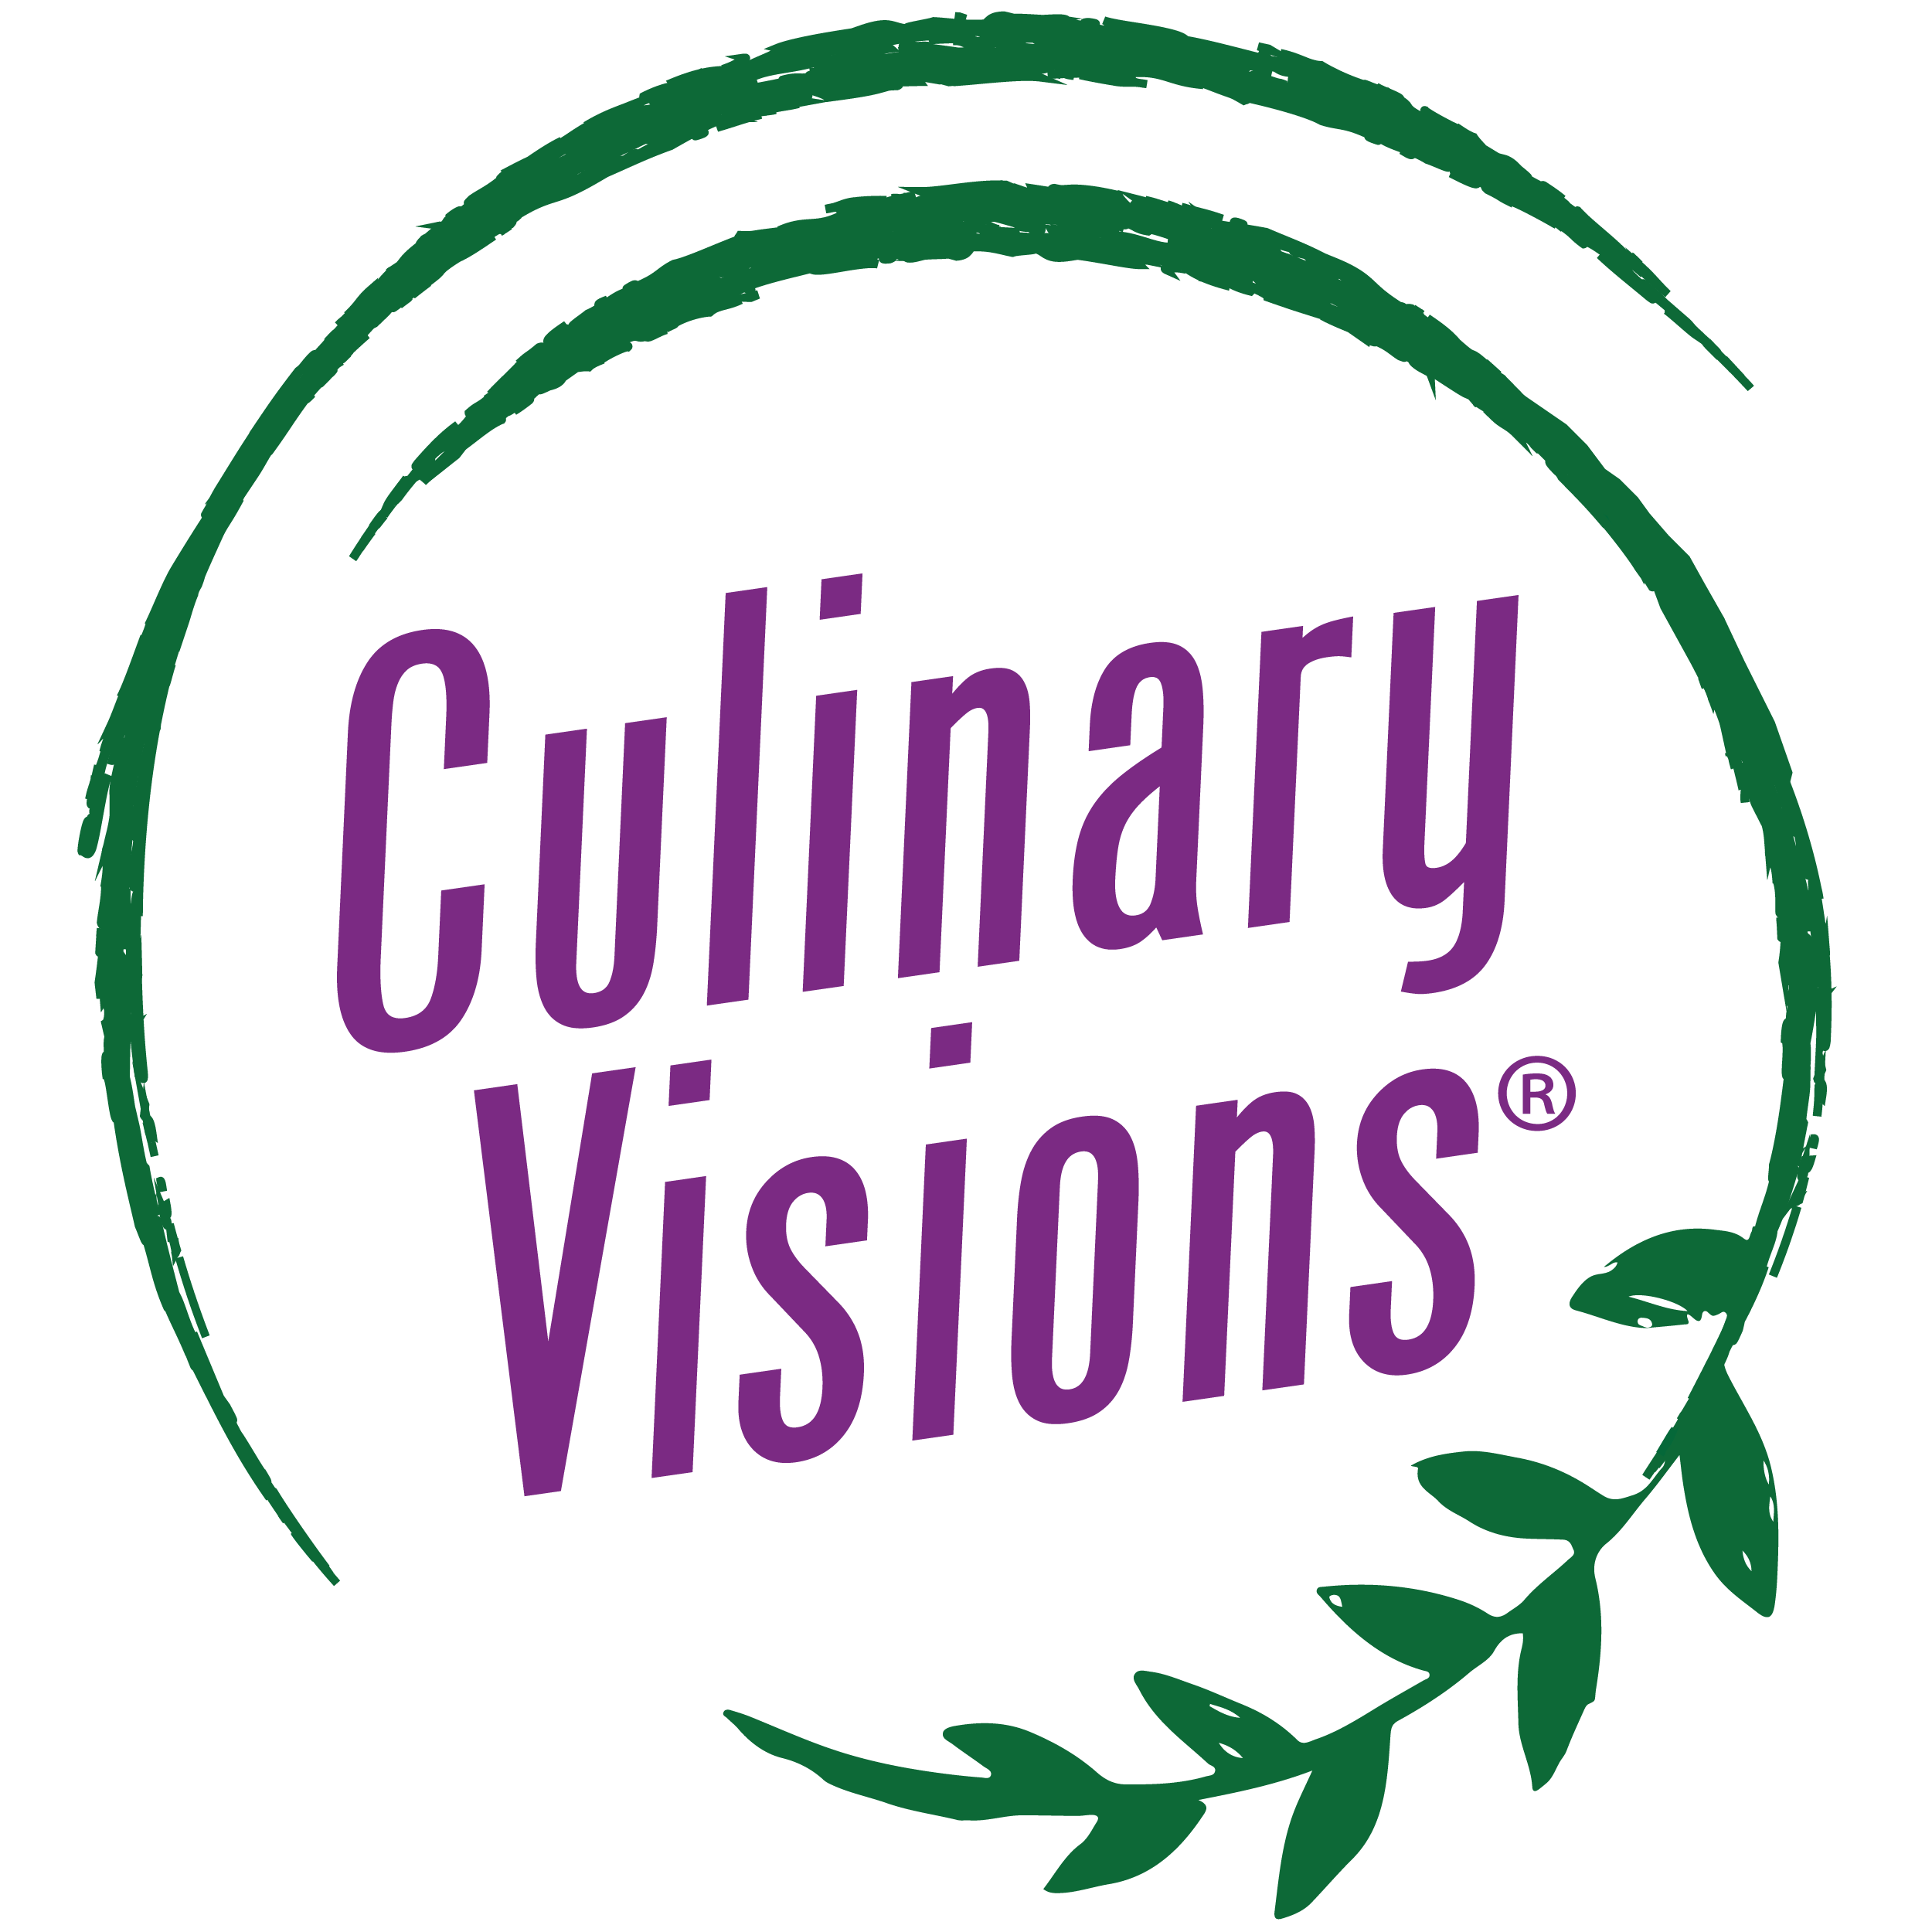 Culinary Visions Panel, Chicago Food-focused Consumer Research, Food  Expert Panels